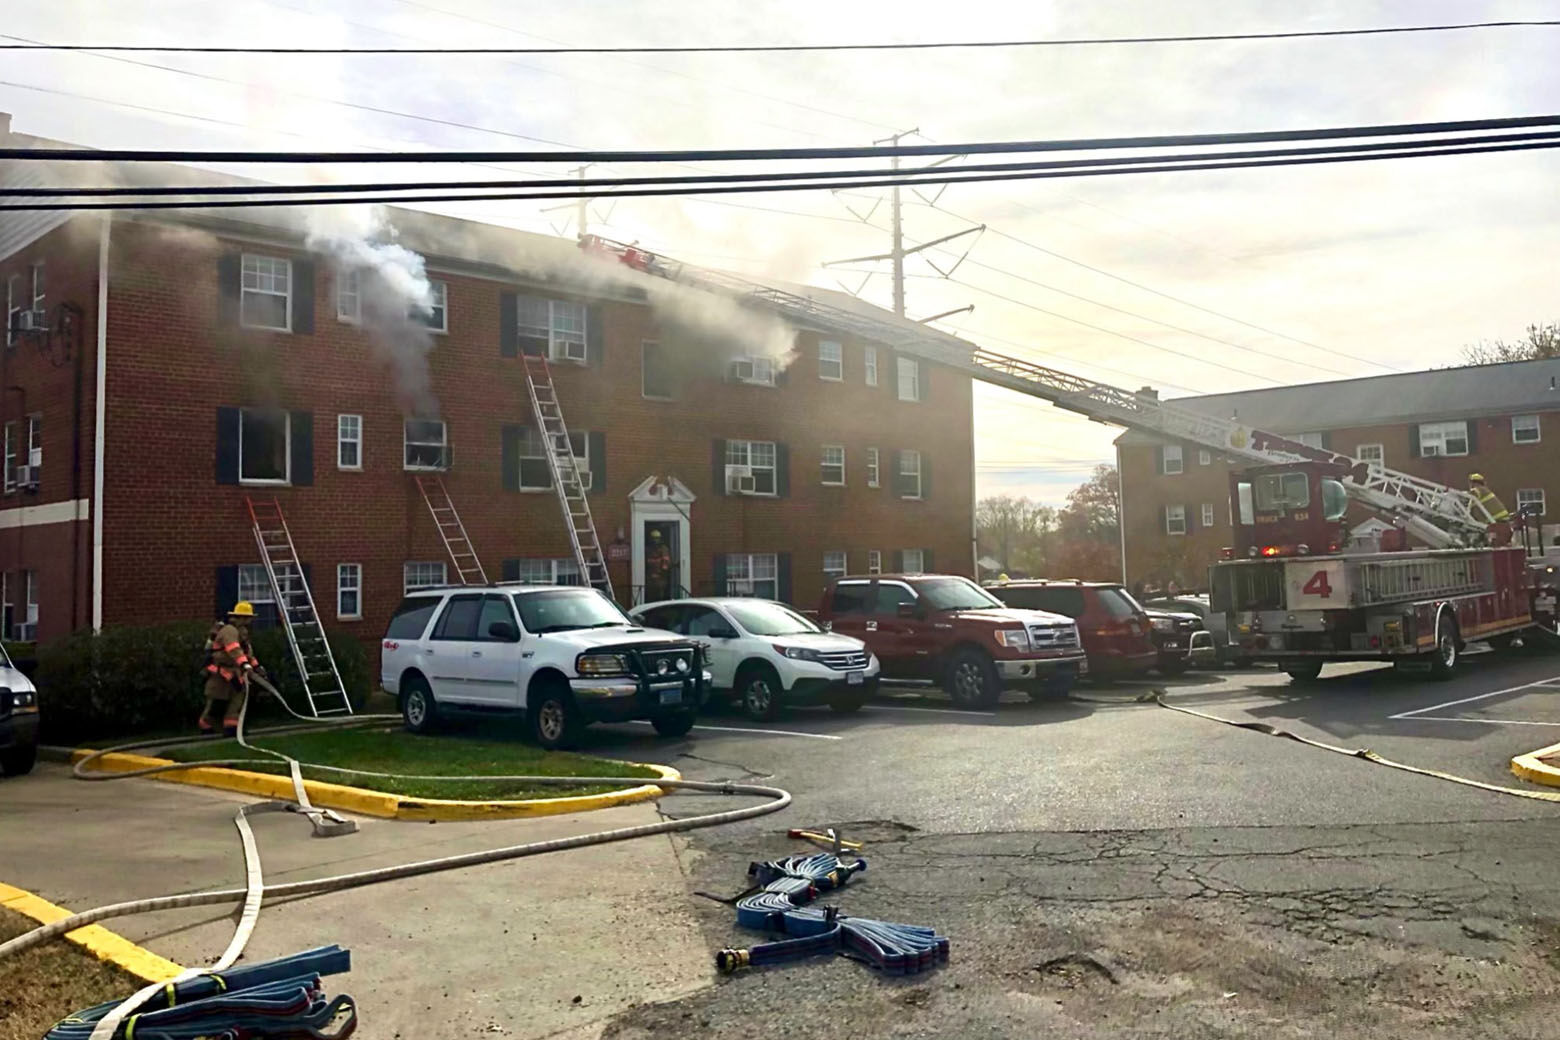 At least 45 people were displaced by a fire in an apartment building in Langley Park on Thanksgiving Day. (Courtesy Prince George's County Fire Department)